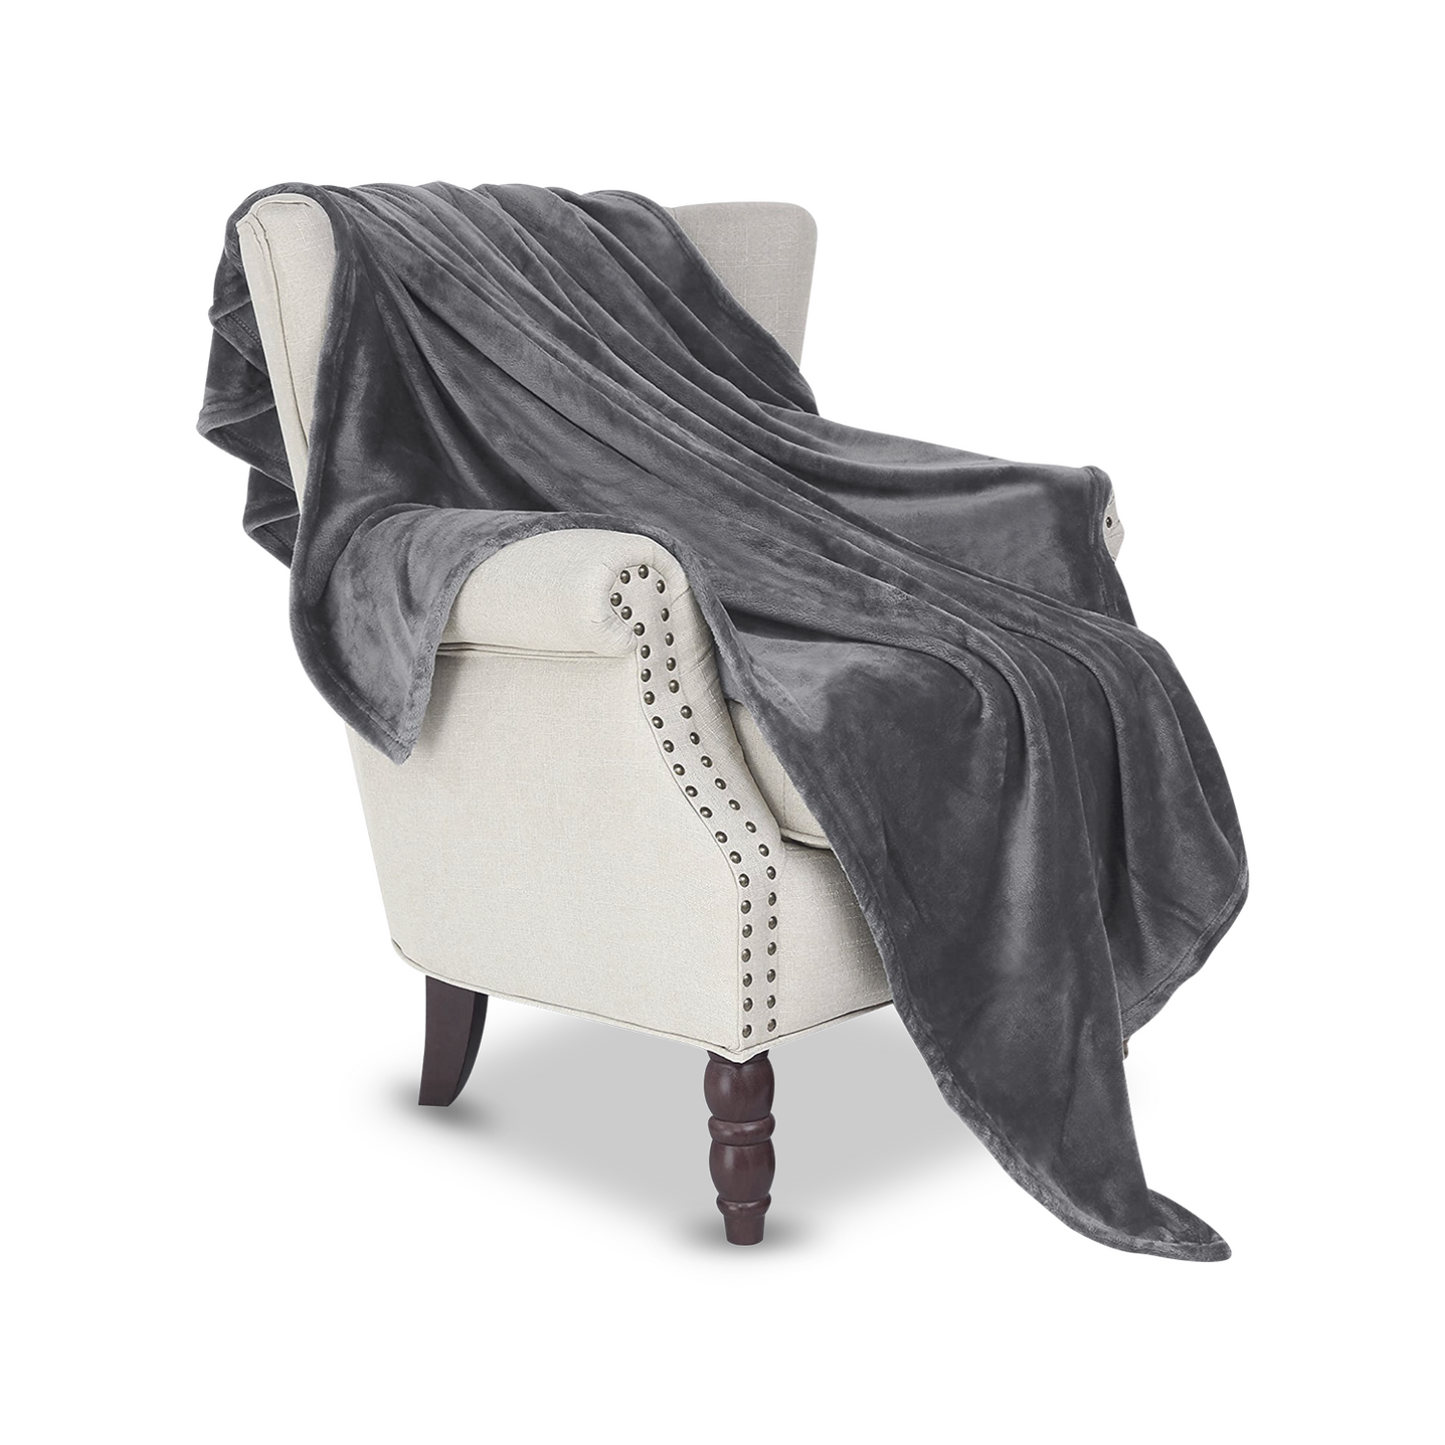 Oversized Throw Blanket - 50 x 70" Size, 100% Polyester